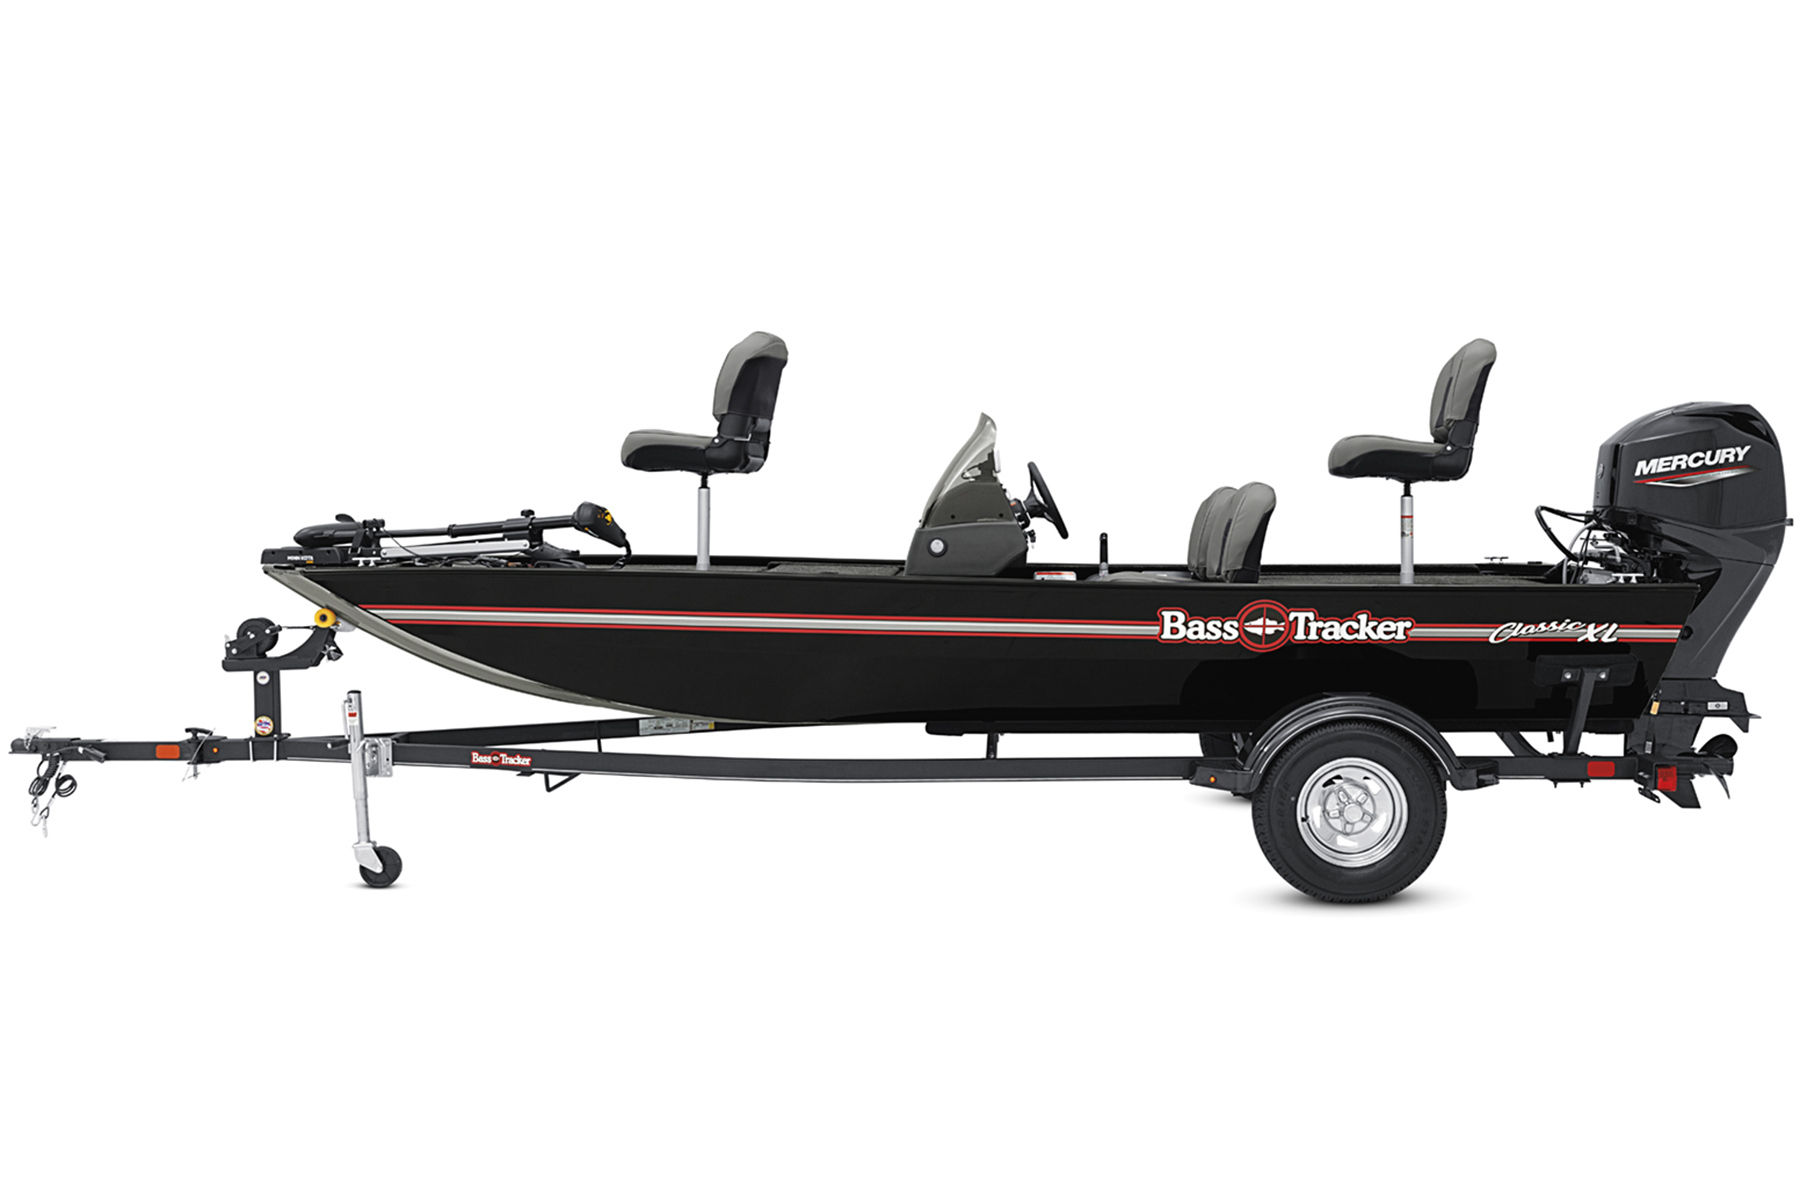 4 Person Bass Fishing Boat / Enjoy Fishing With Friends And Family On This 4 Persons Jon Boat In